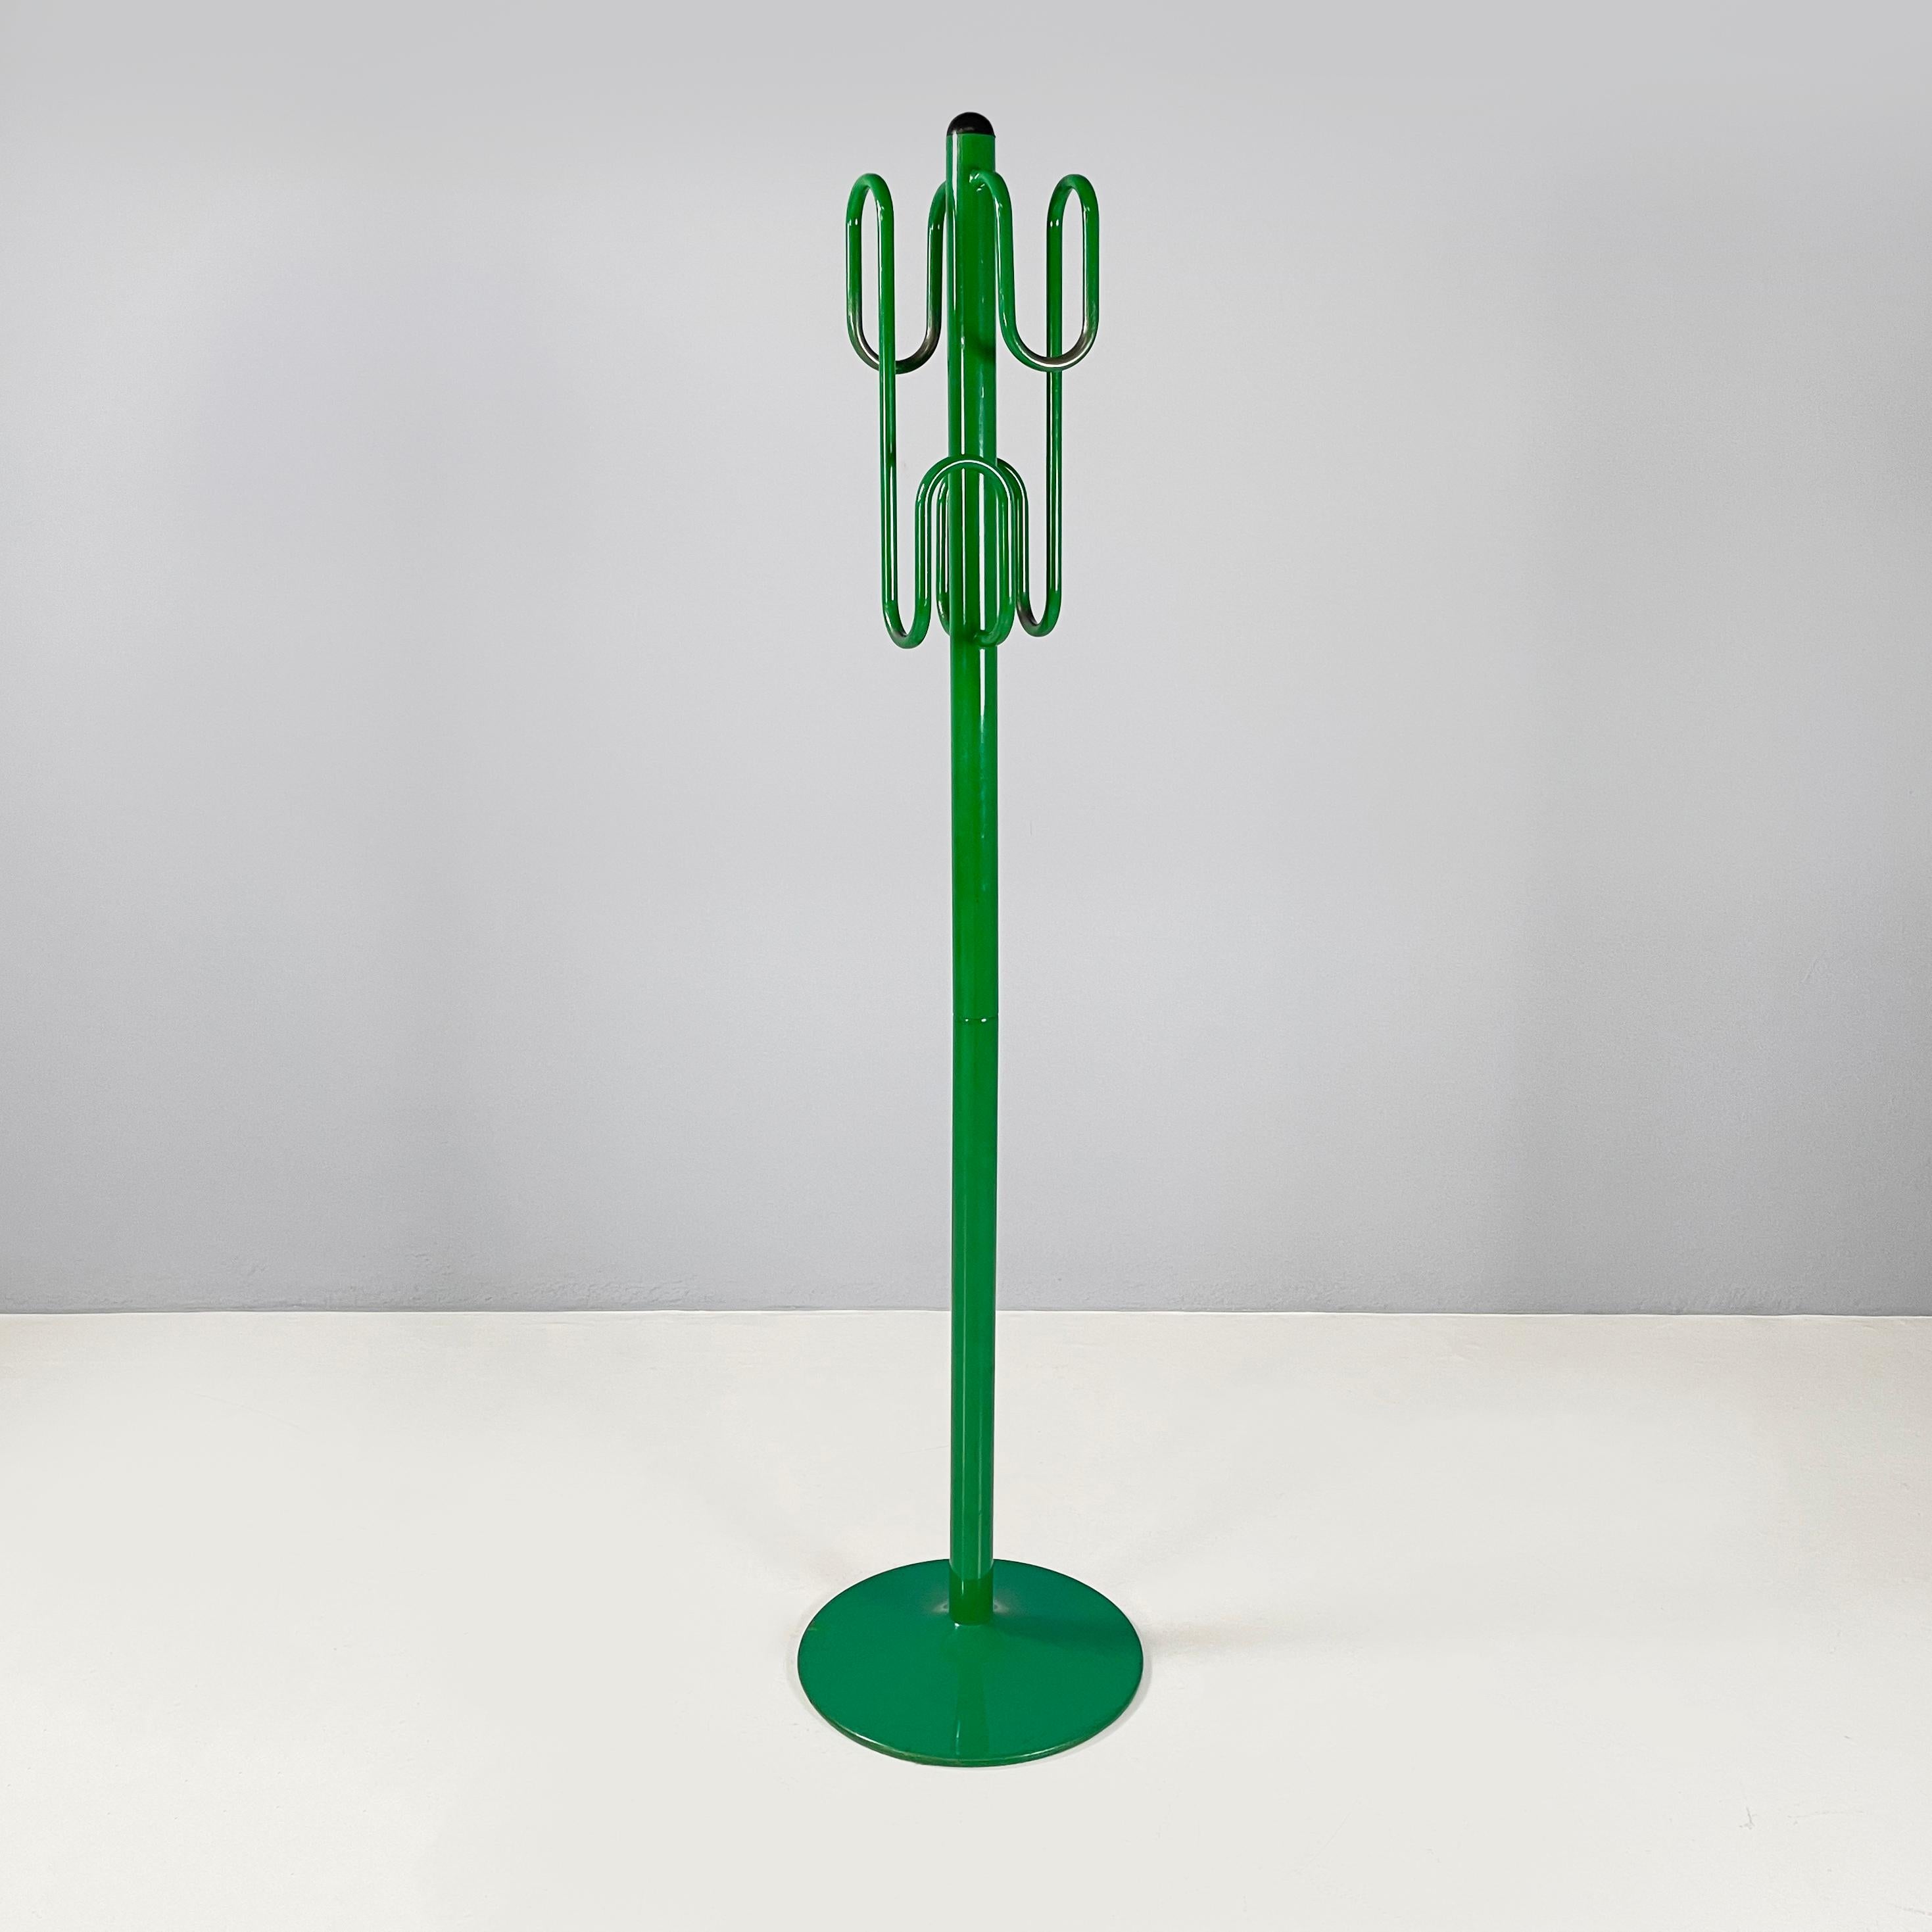 Italian space age modern floor coat hanger in green metal, 1970s
Floor coat hanger with round base in bright green painted metal. In the upper part it has curved metal rods, which act as hooks. Black plastic finish on top. Tubular metal structure.